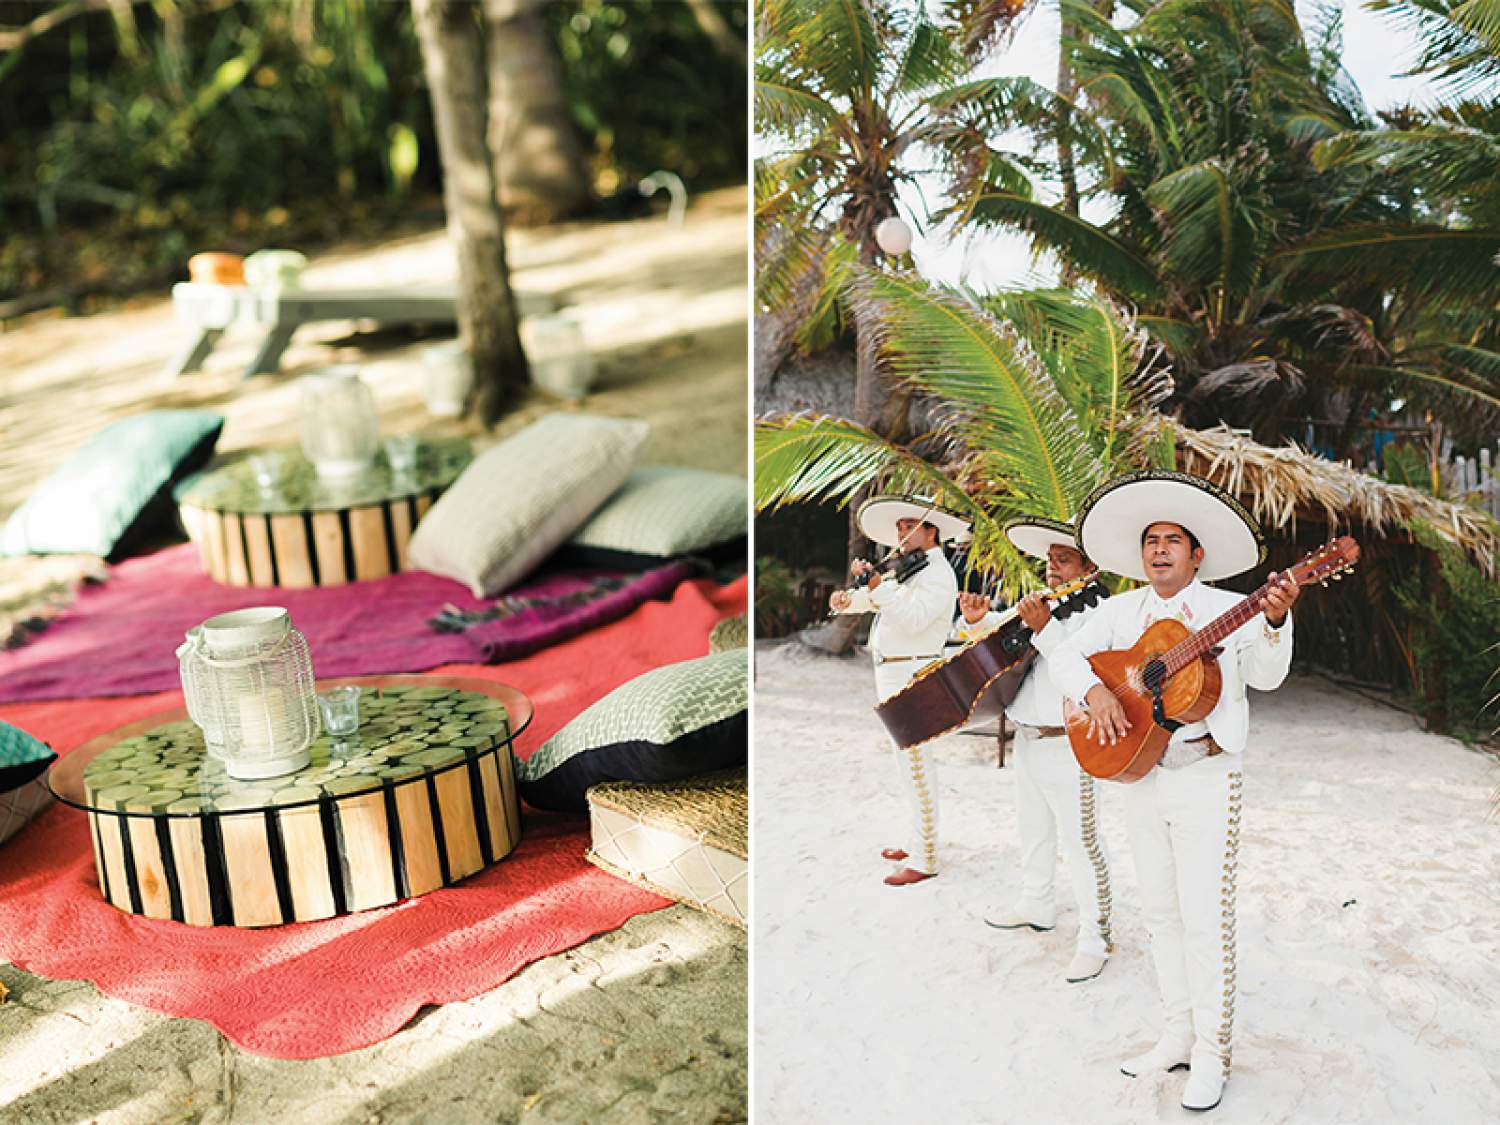 Music and decorations at a destination wedding